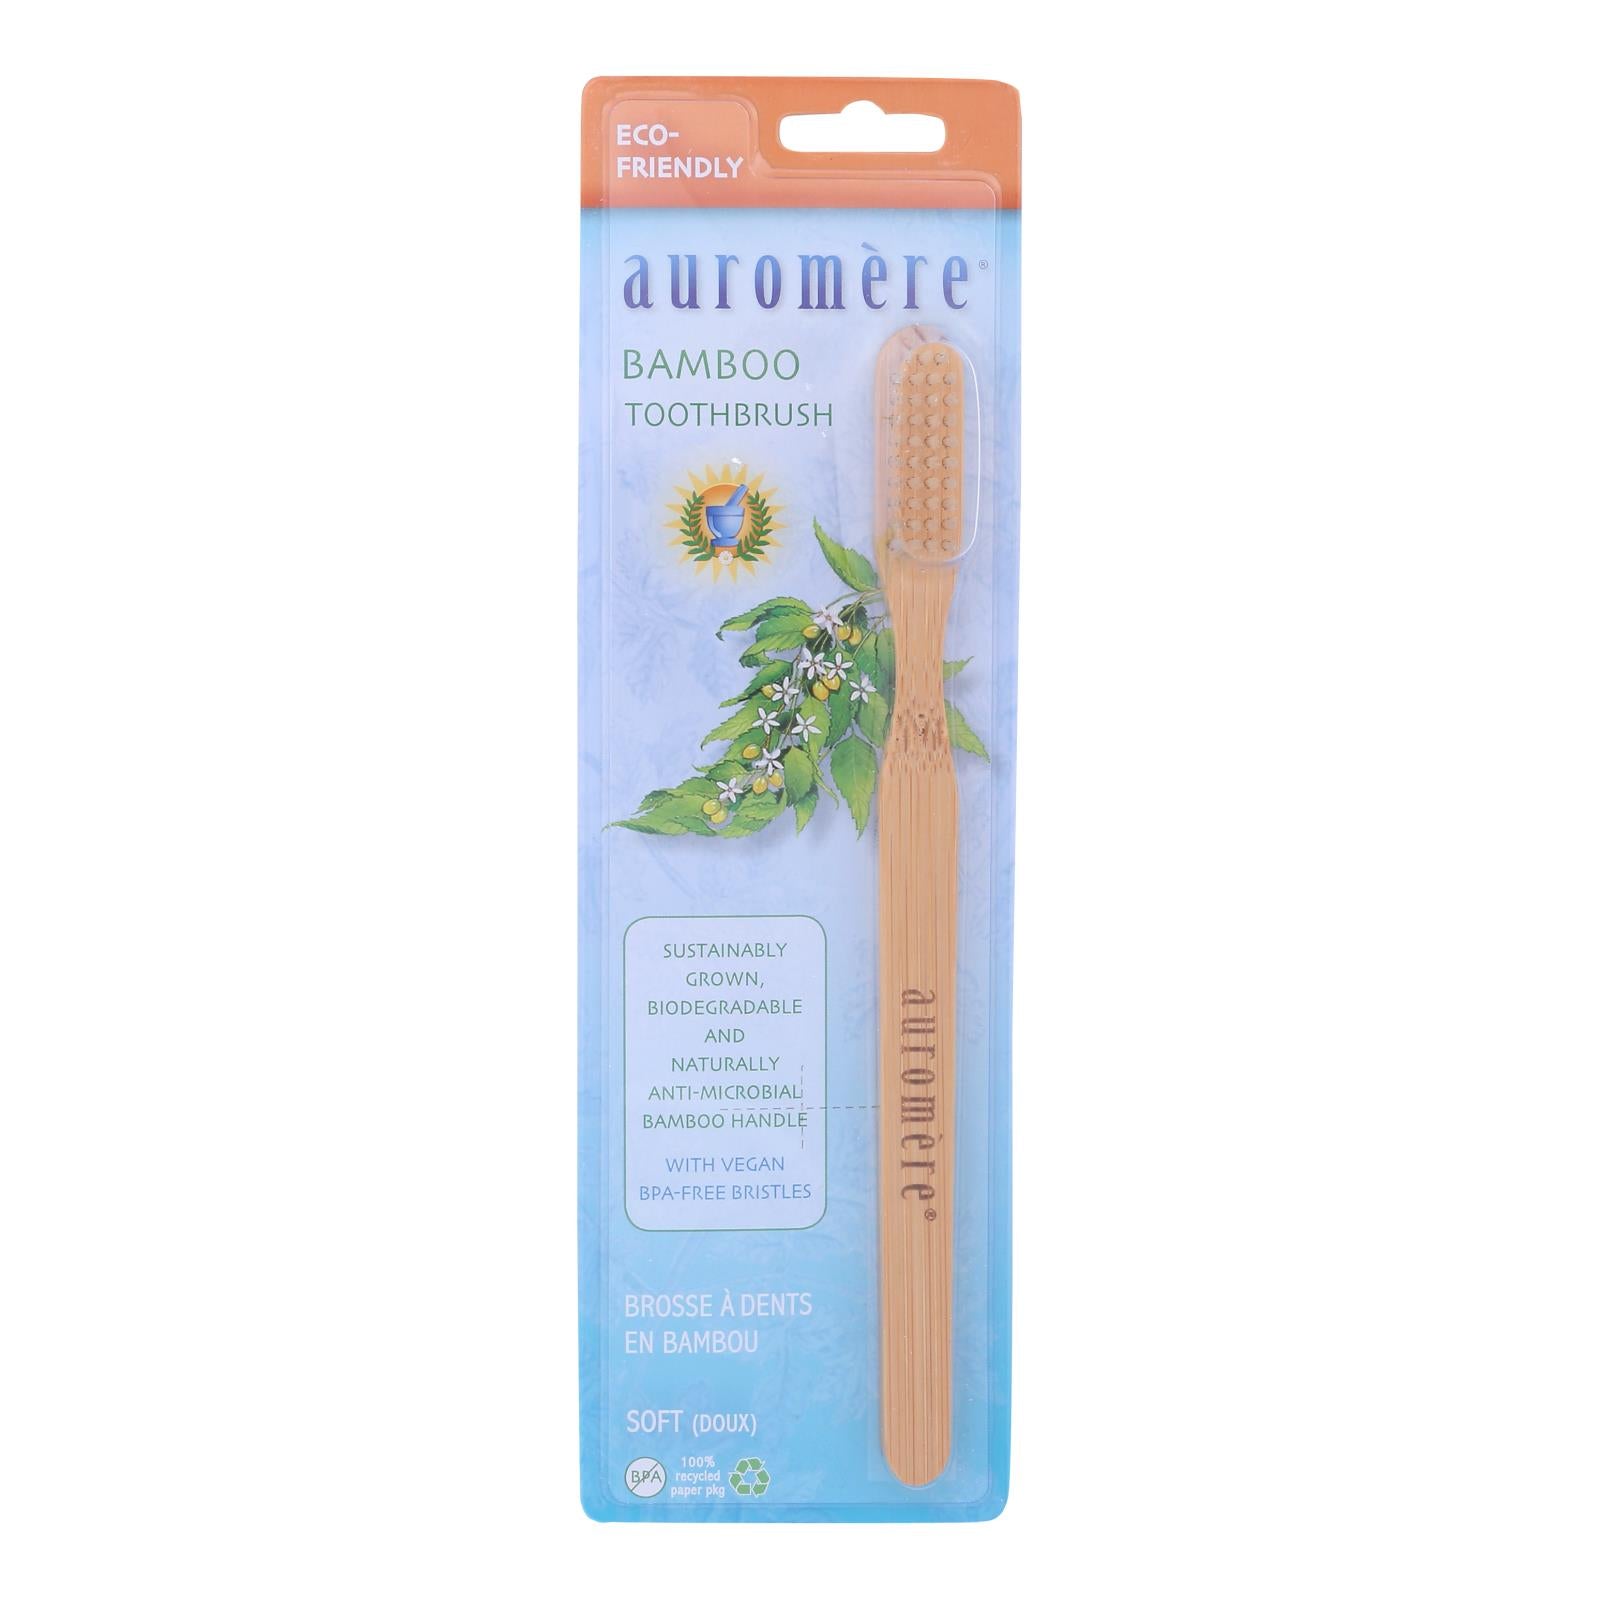 Auromere, Auromere - Tbrush Bamboo - Case of 6 - 1 CT (Pack of 6)